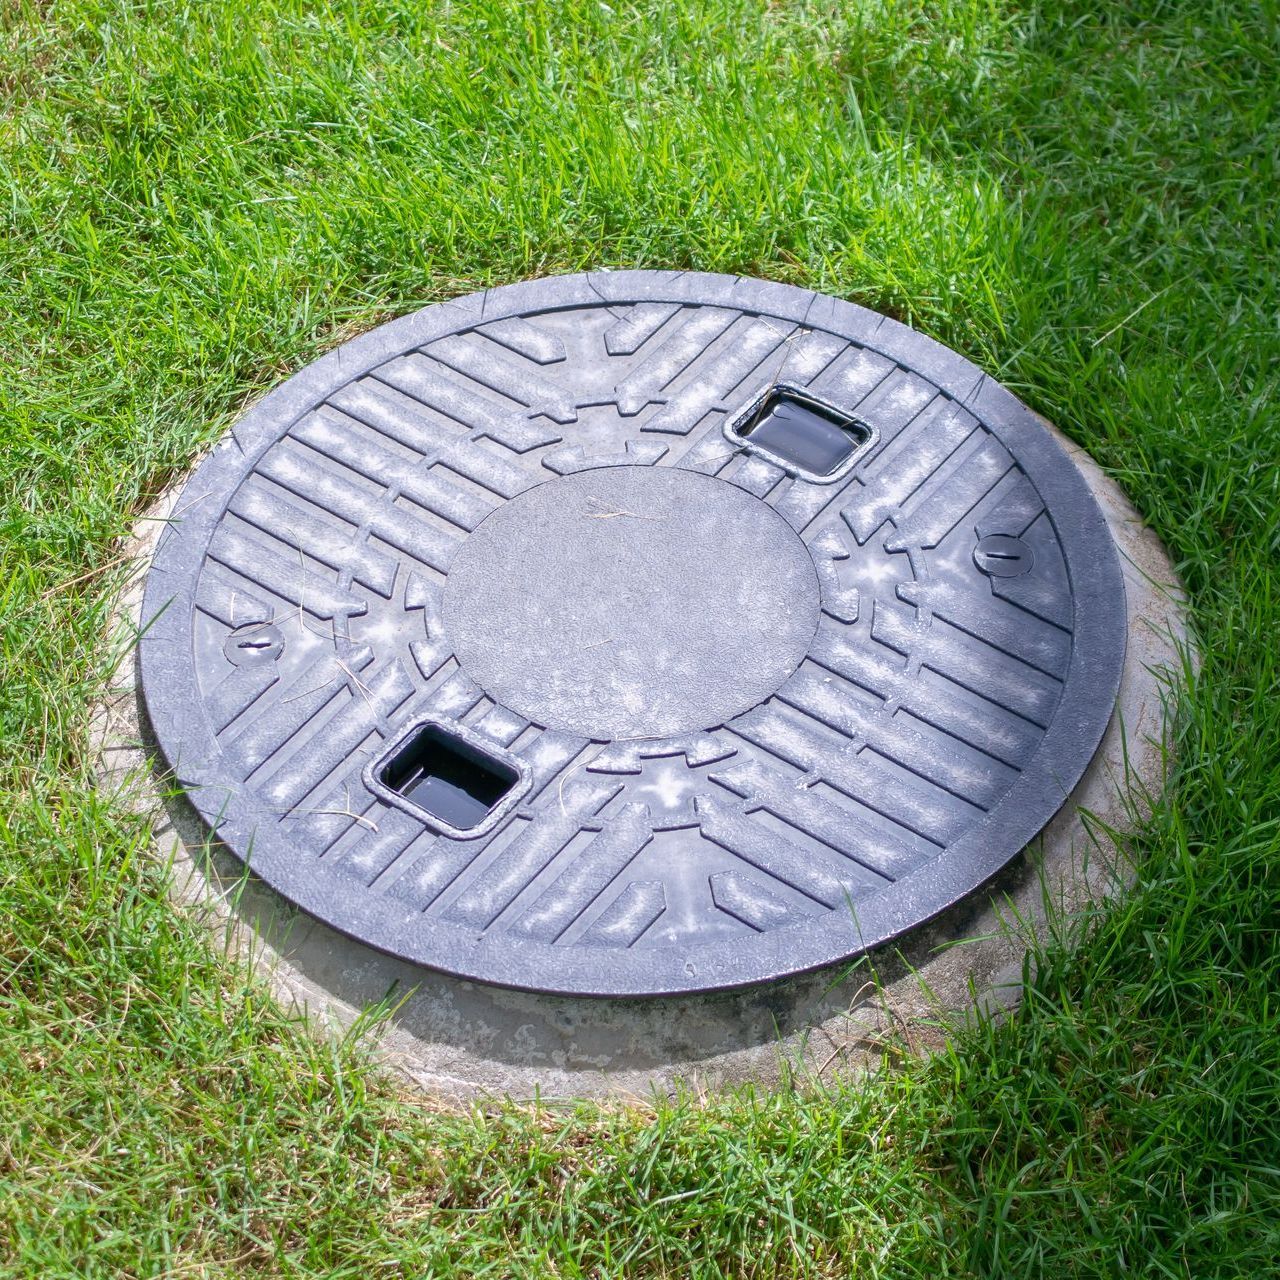 A manhole cover is sitting in the middle of a lush green field.